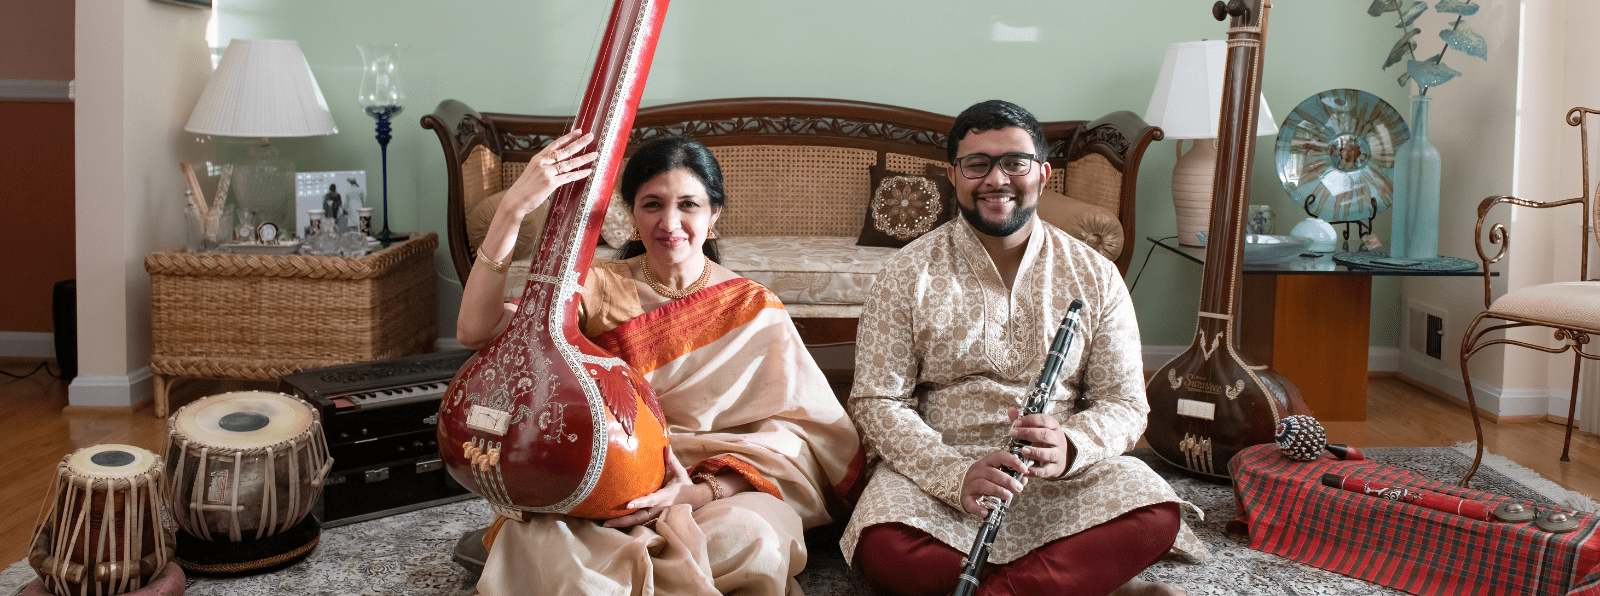 A man and a woman sit on the floor holding instruments